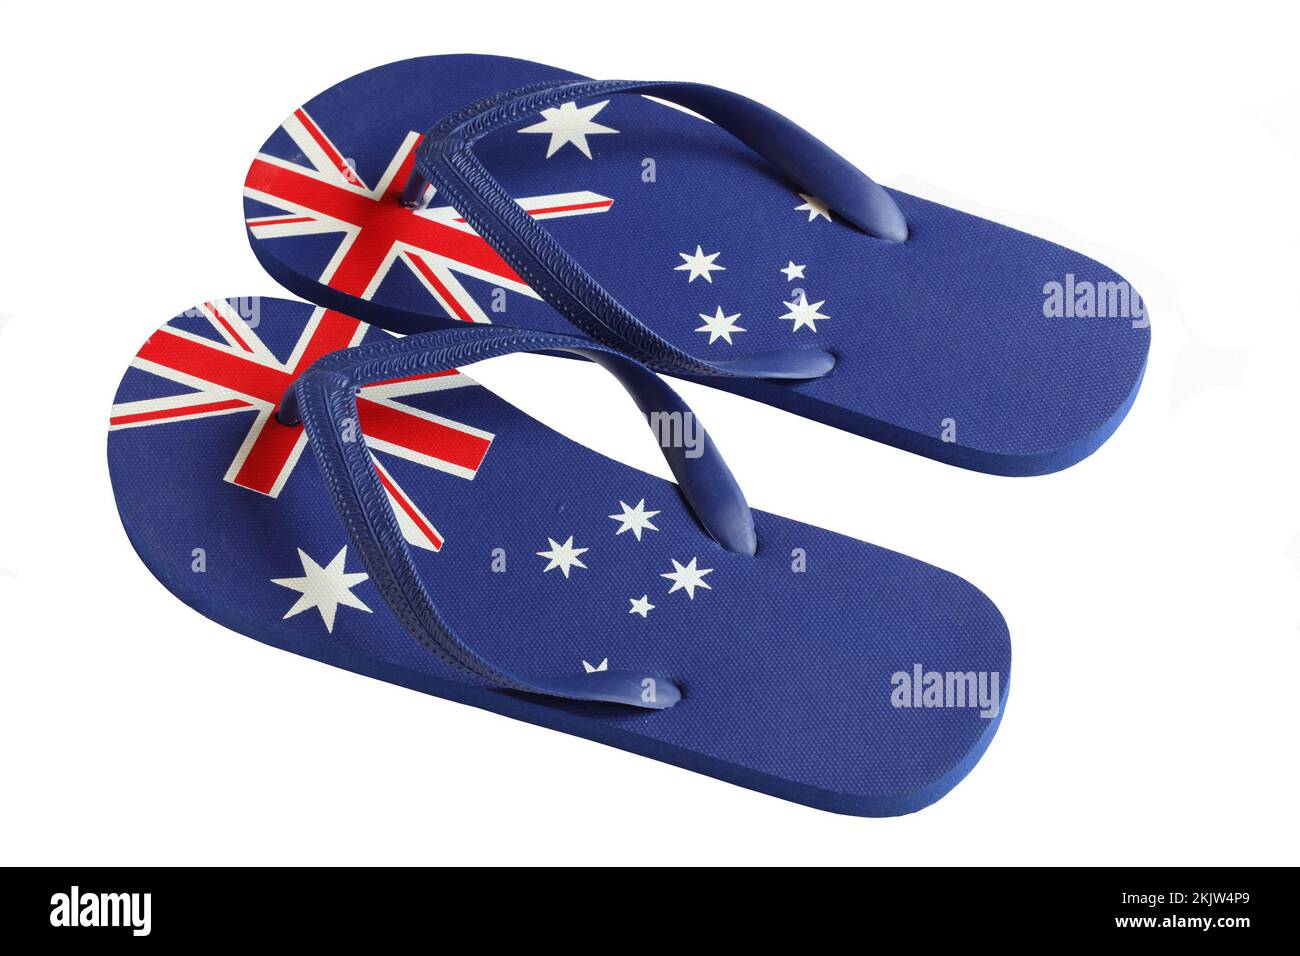 Thongs australia Cut Out Stock Images & Pictures - Alamy